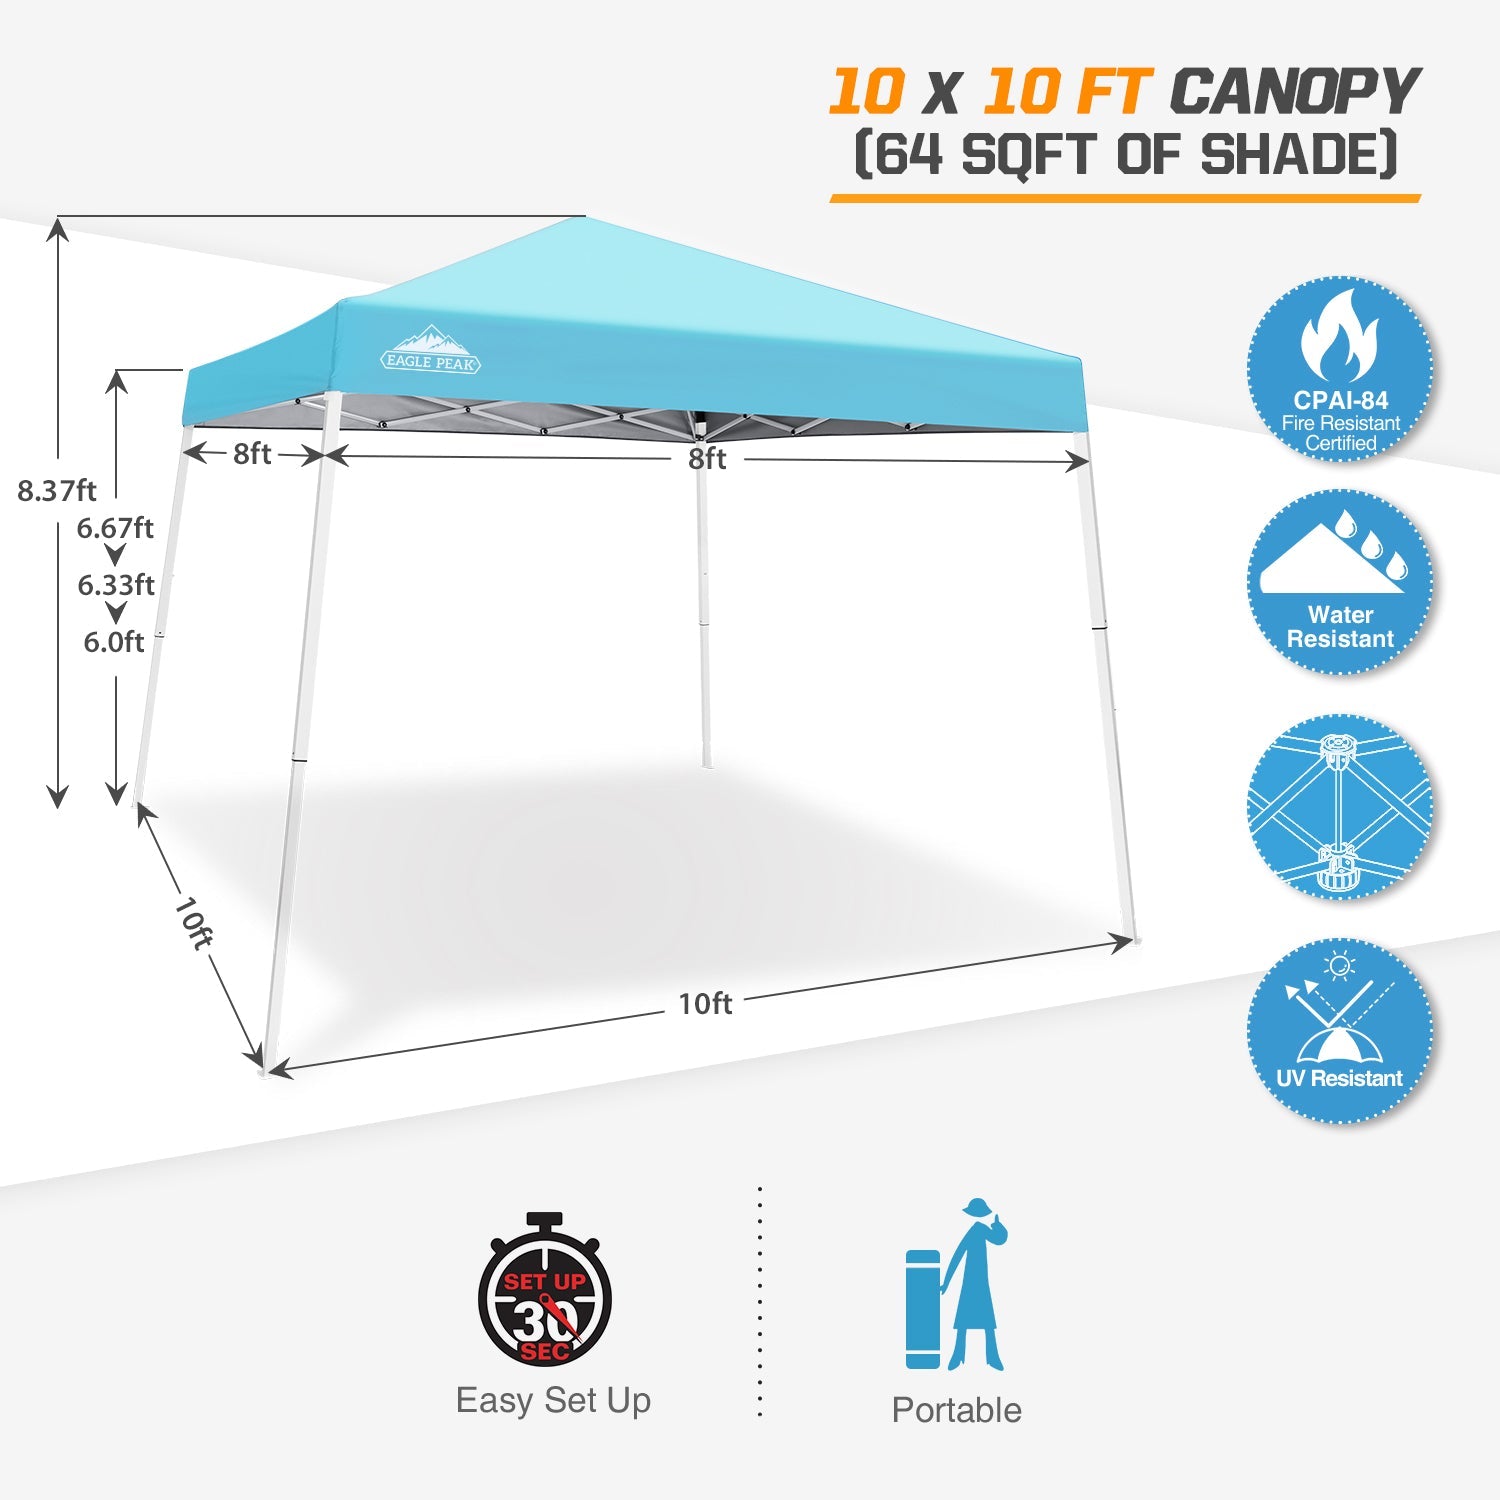 EAGLE PEAK 10' x 10' Slant Leg Pop-up Canopy Tent Easy One Person Setup Instant Outdoor Canopy Folding Shelter with 64 Square Feet of Shade (Light Blue)